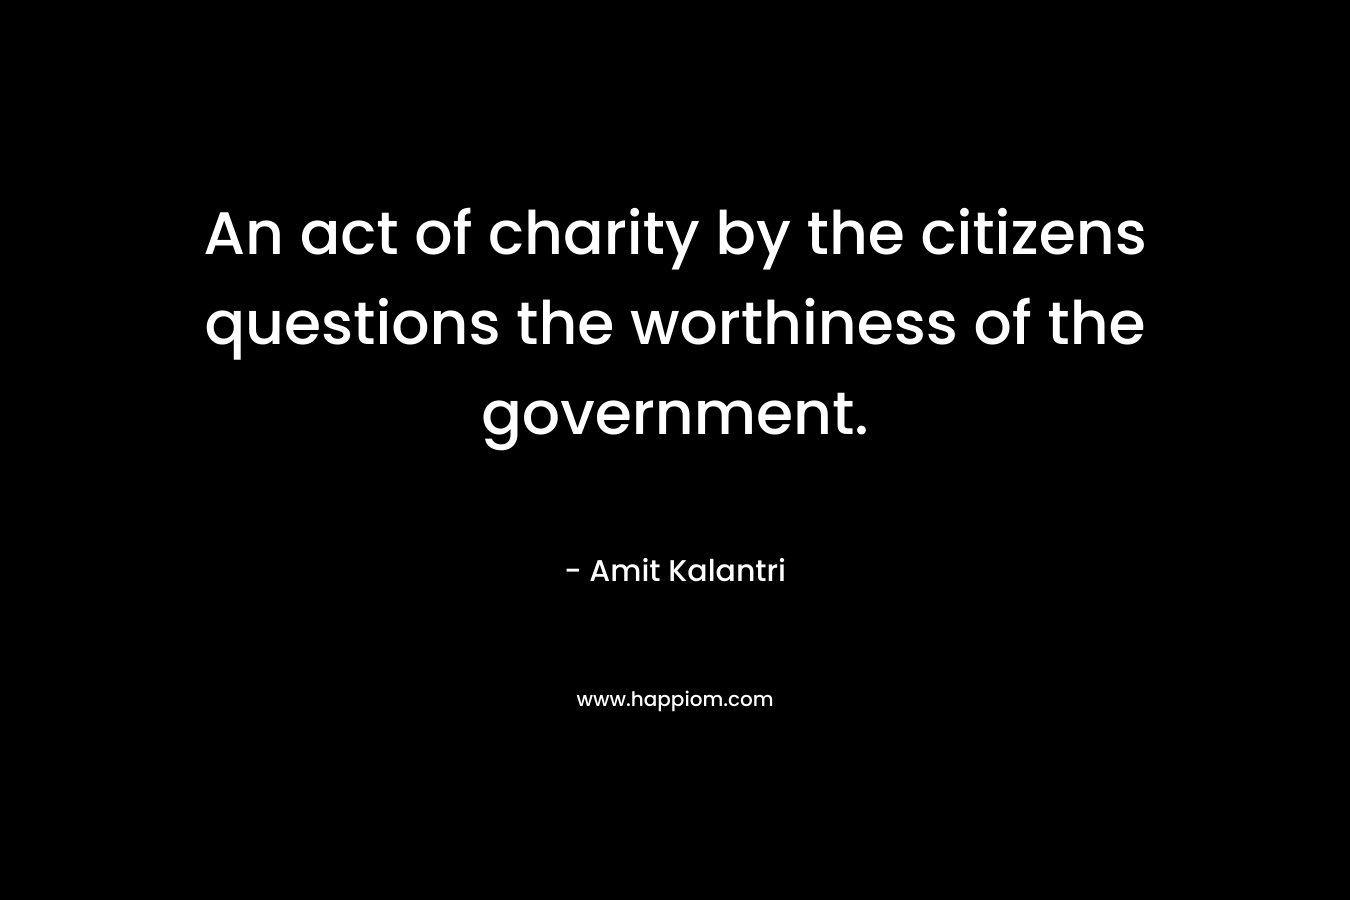 An act of charity by the citizens questions the worthiness of the government. – Amit Kalantri